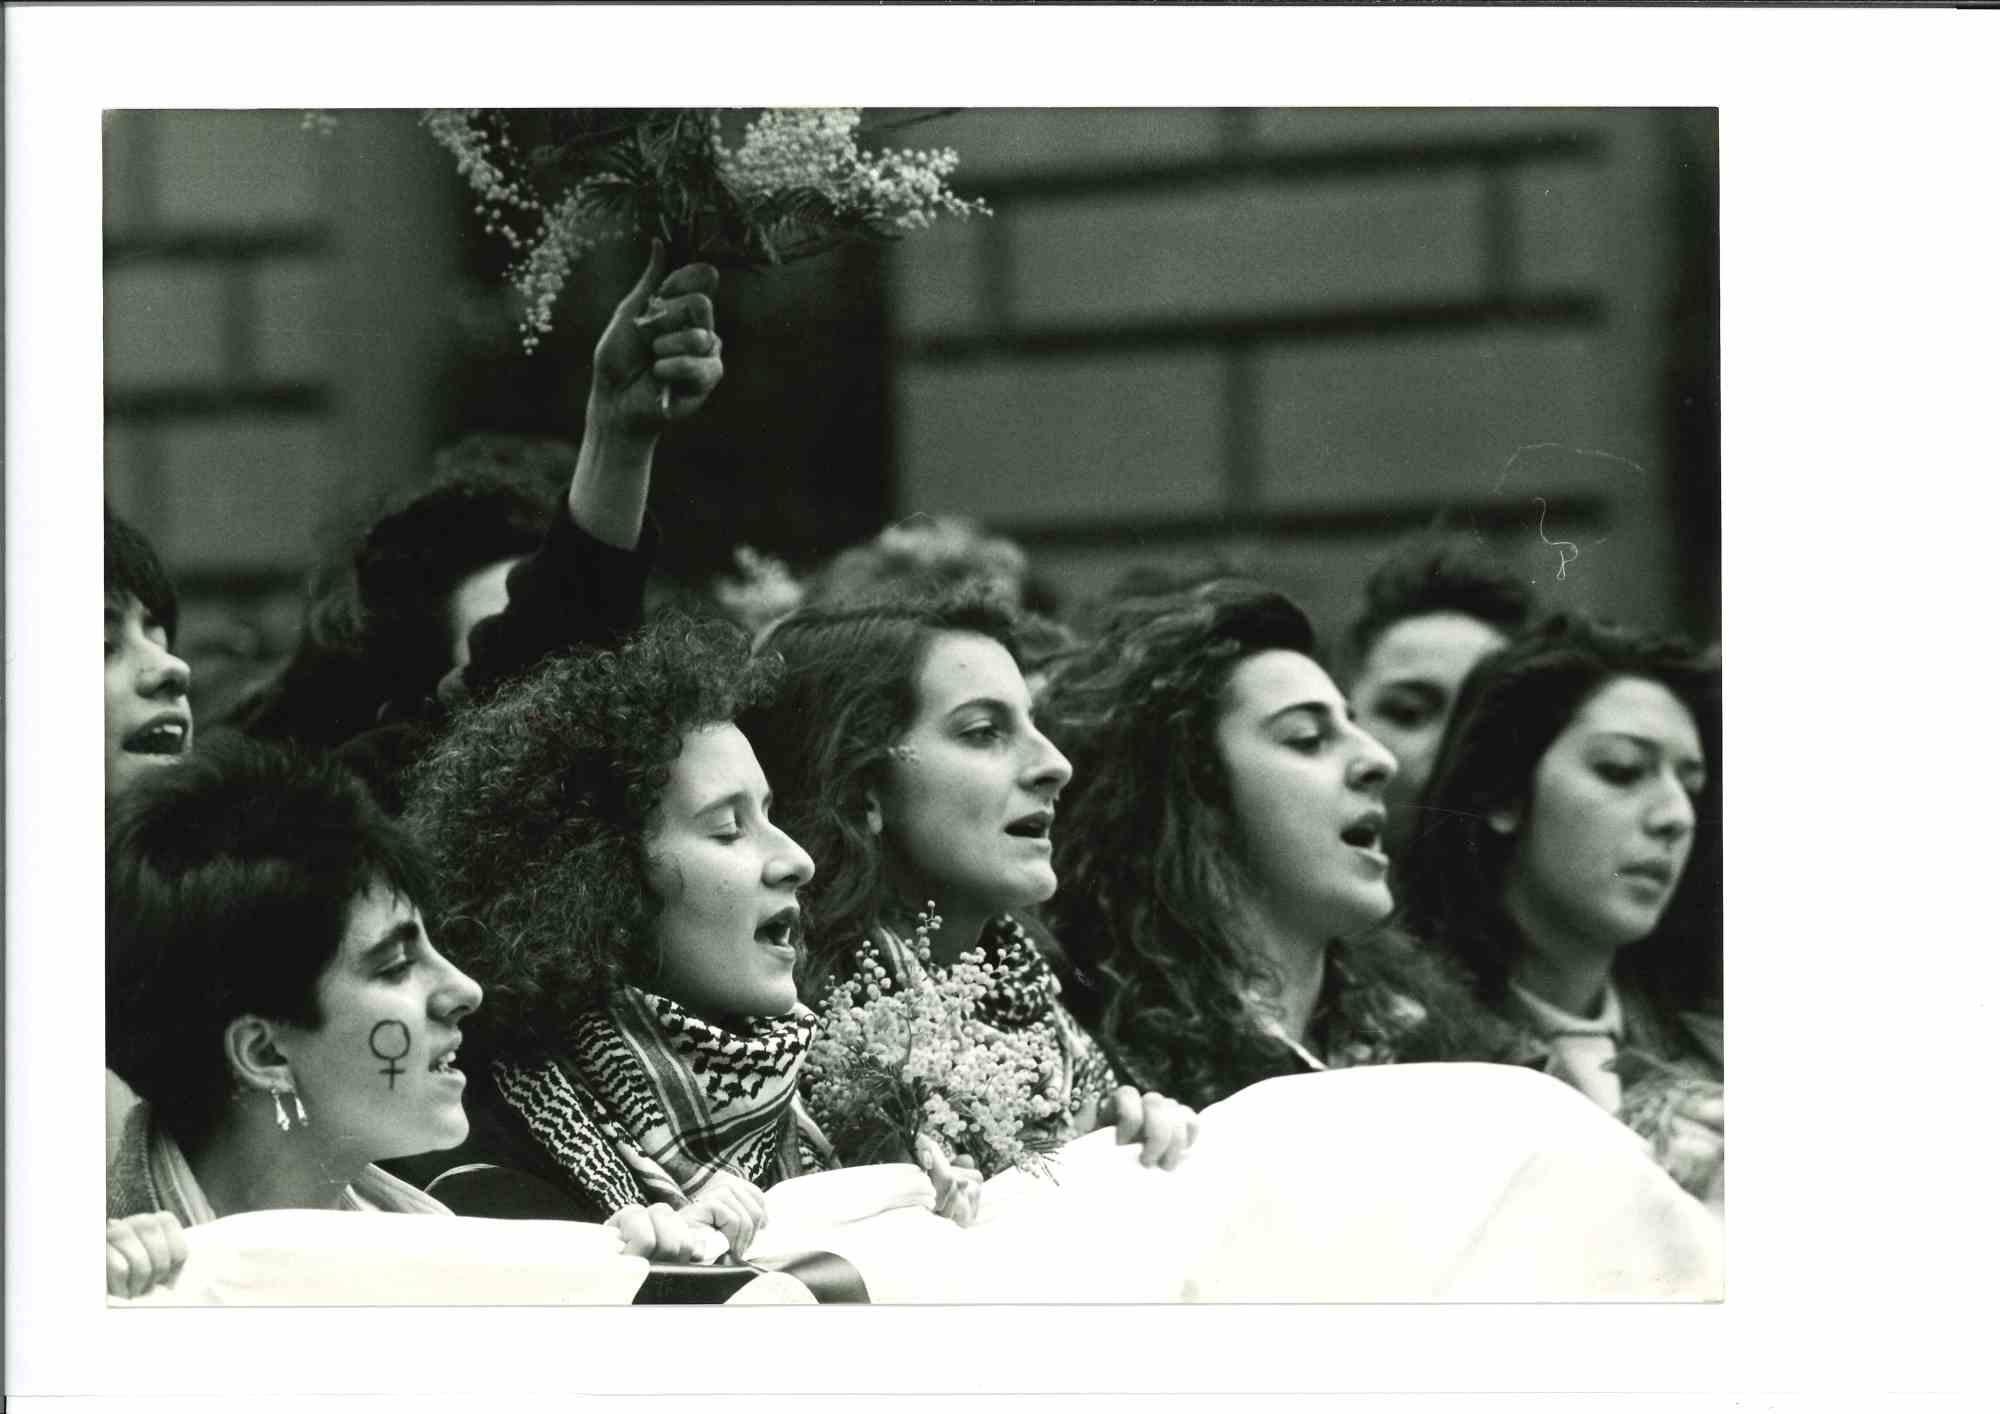 Unknown Figurative Photograph - Women Movement and Rights - Historical Photo -1960s